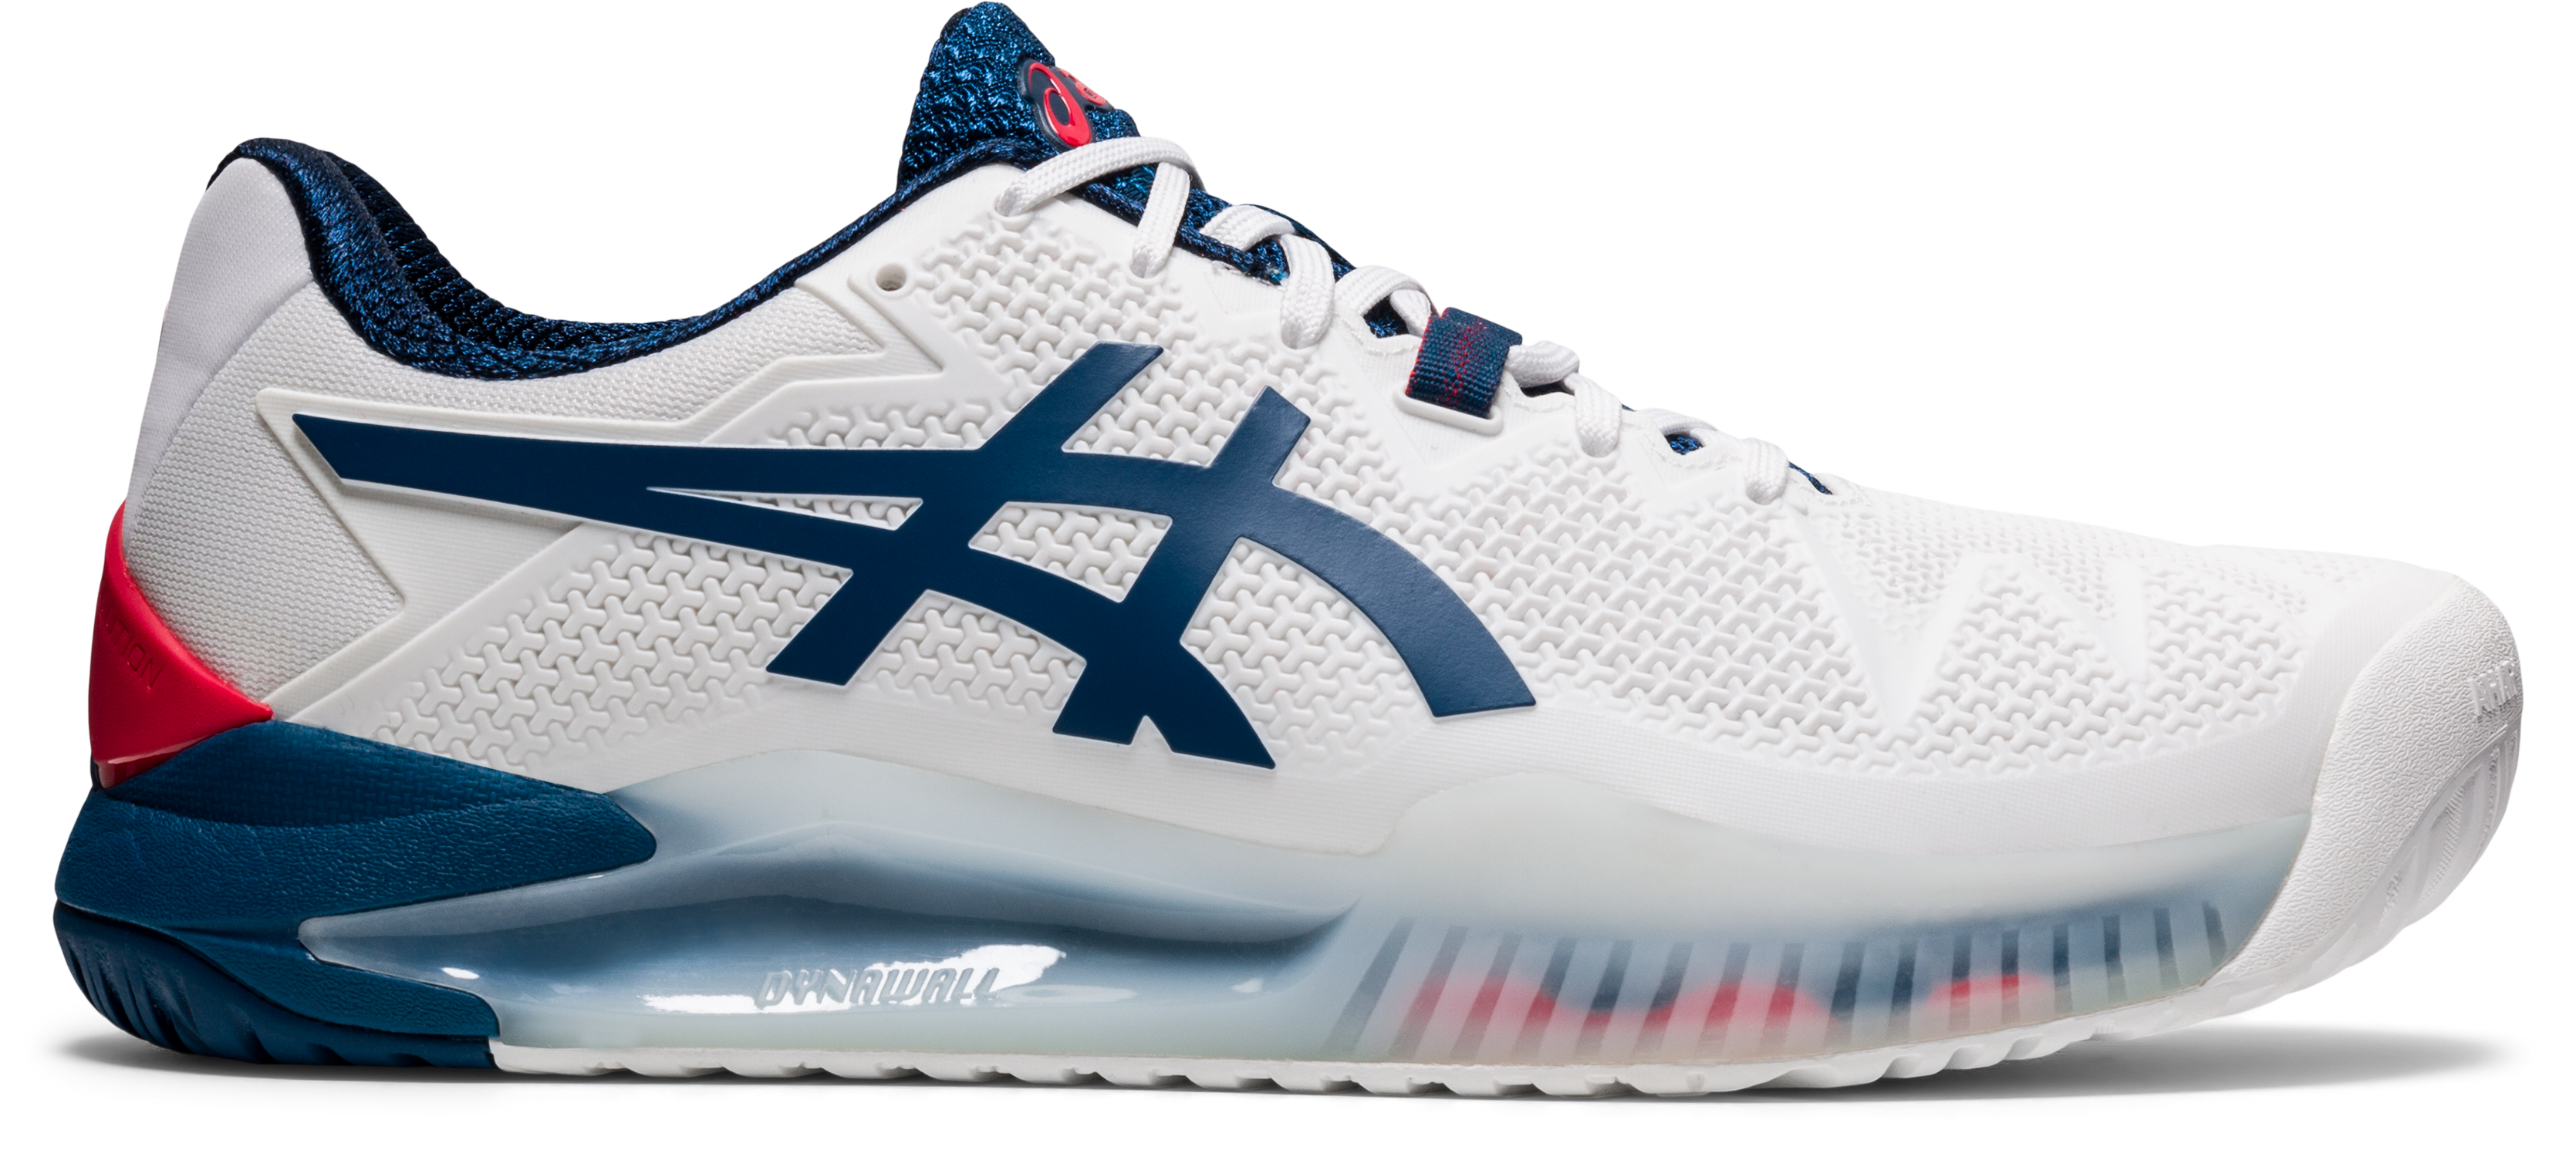 asics tennis shoes wide